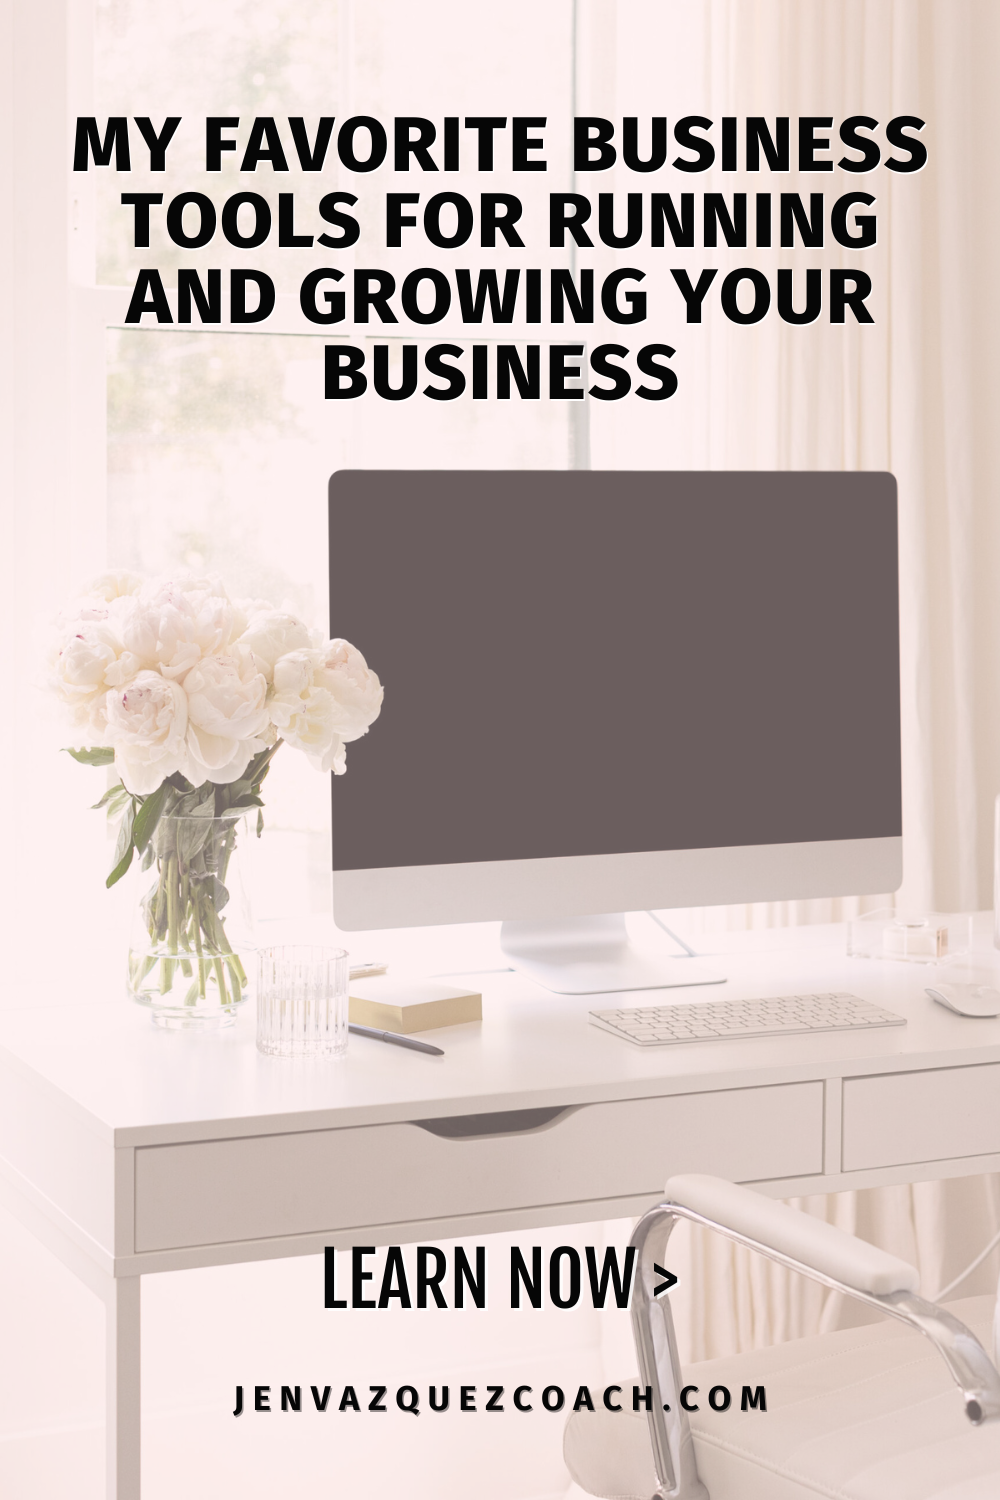 My Favorite Business Tools for Running and Growing Your BusinessMy Favorite Business Tools for Running and Growing Your Business 2